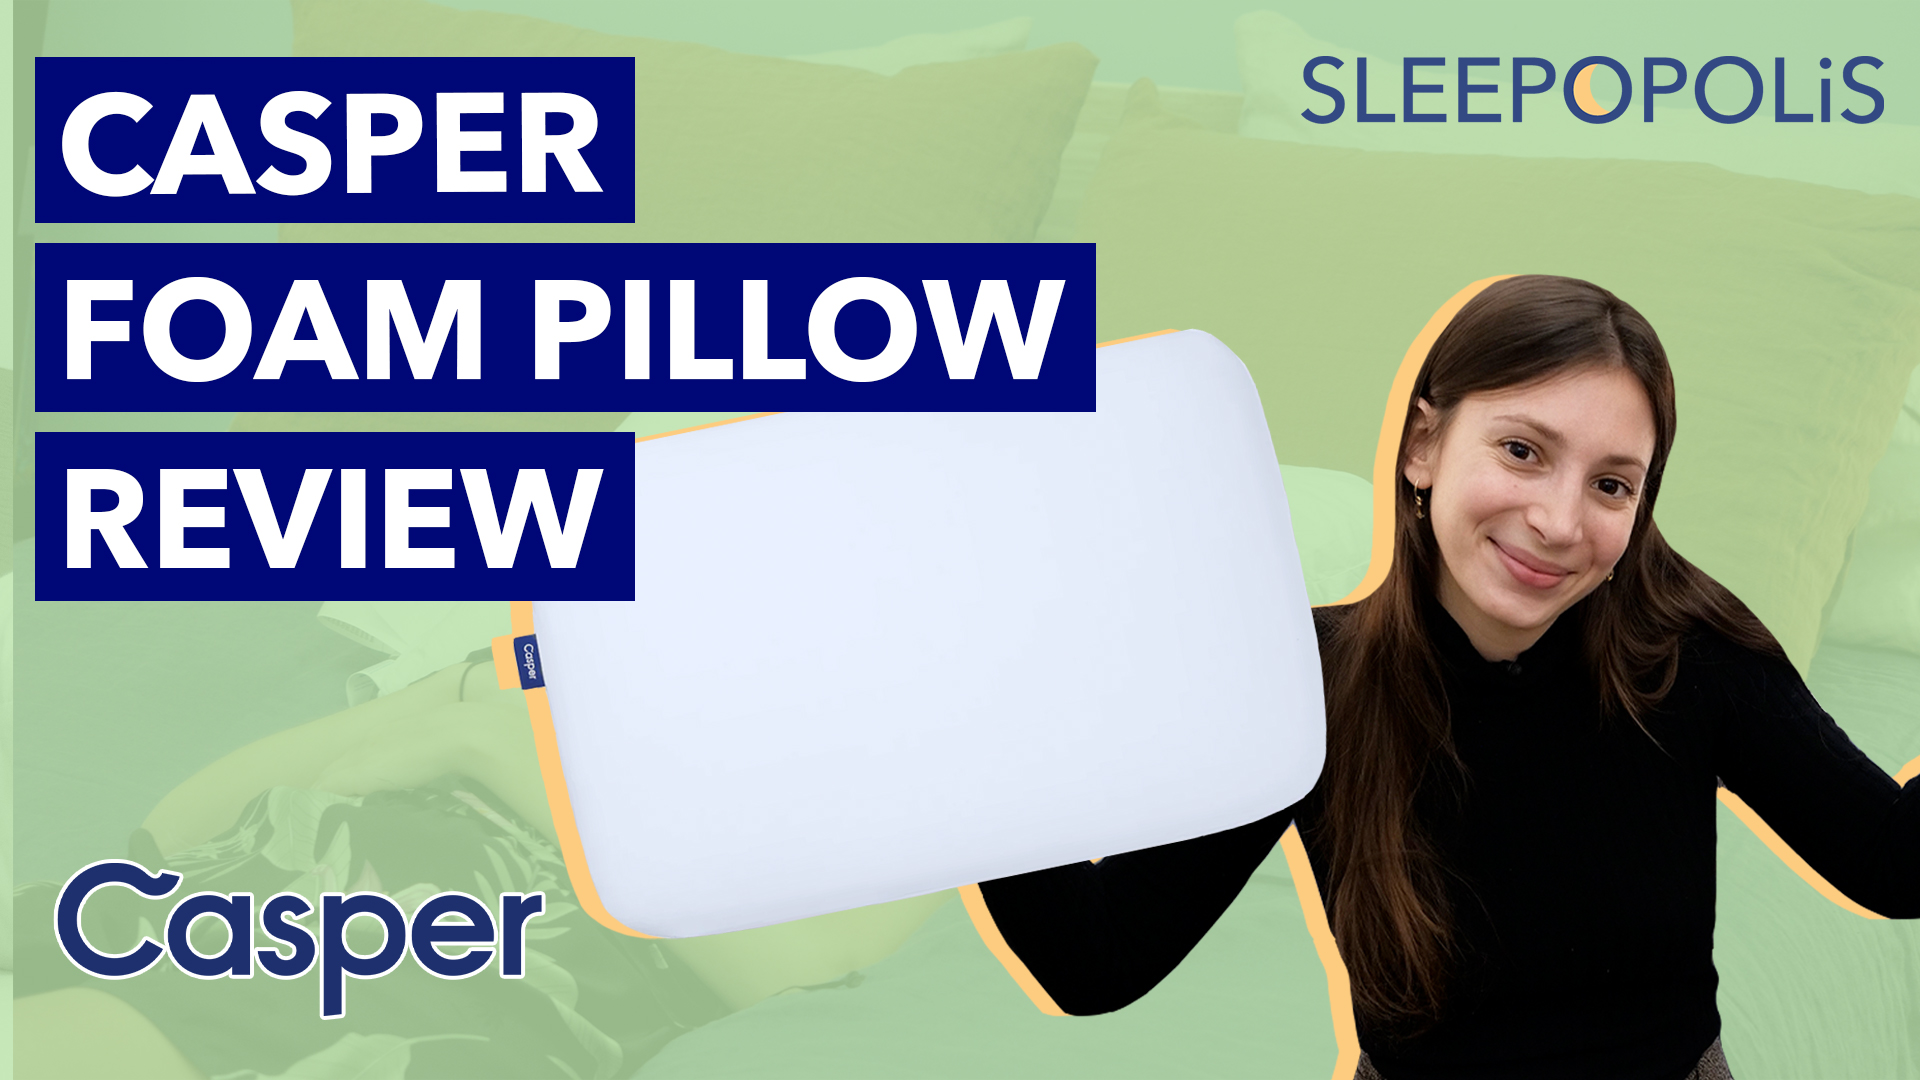 Sleeping Without a Pillow: Is It Bad For You? - Casper Blog